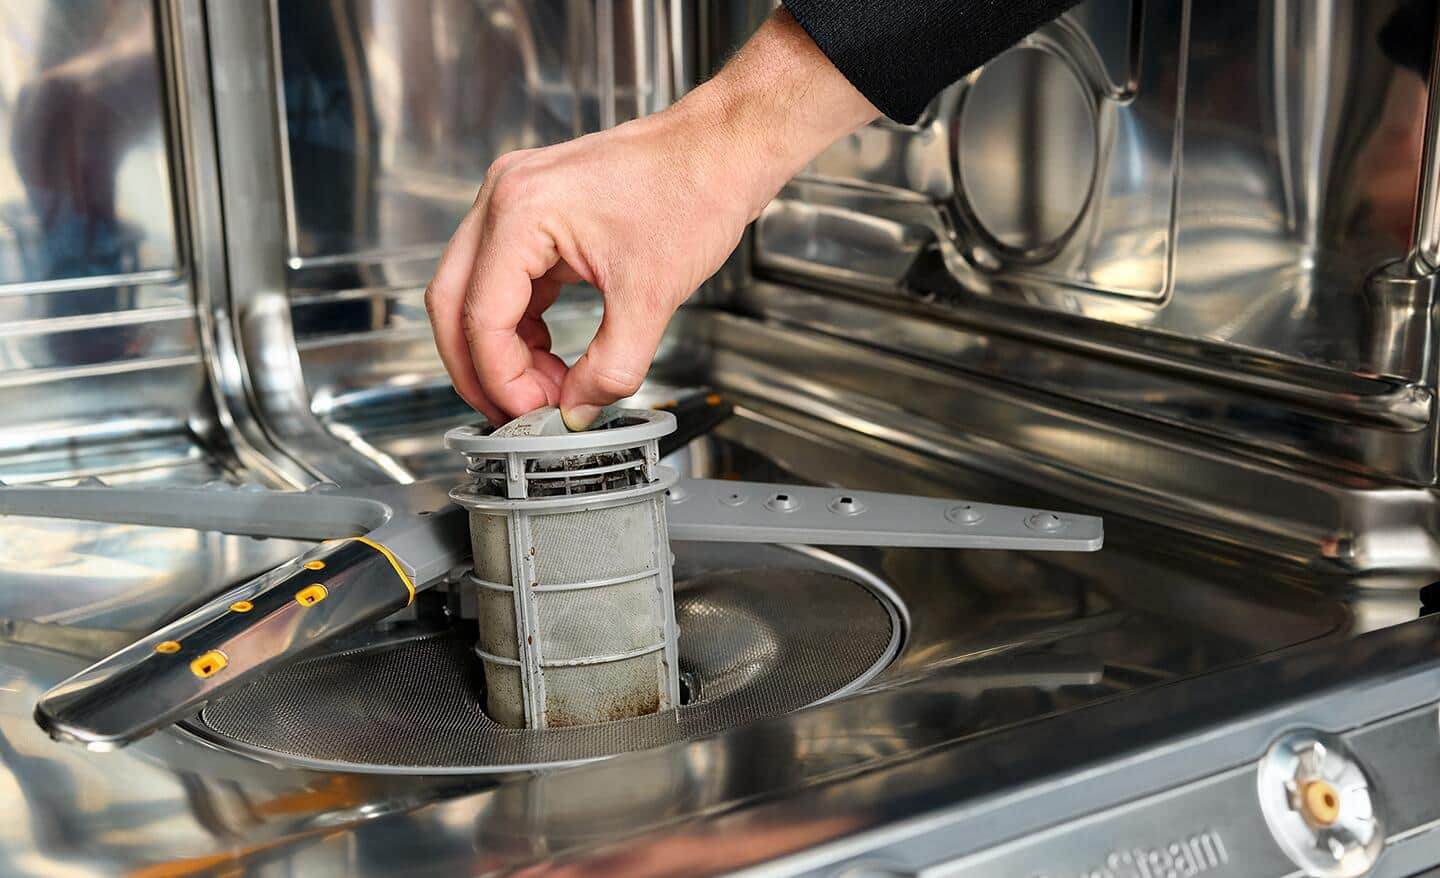 A person removing the filter from a dishwasher.